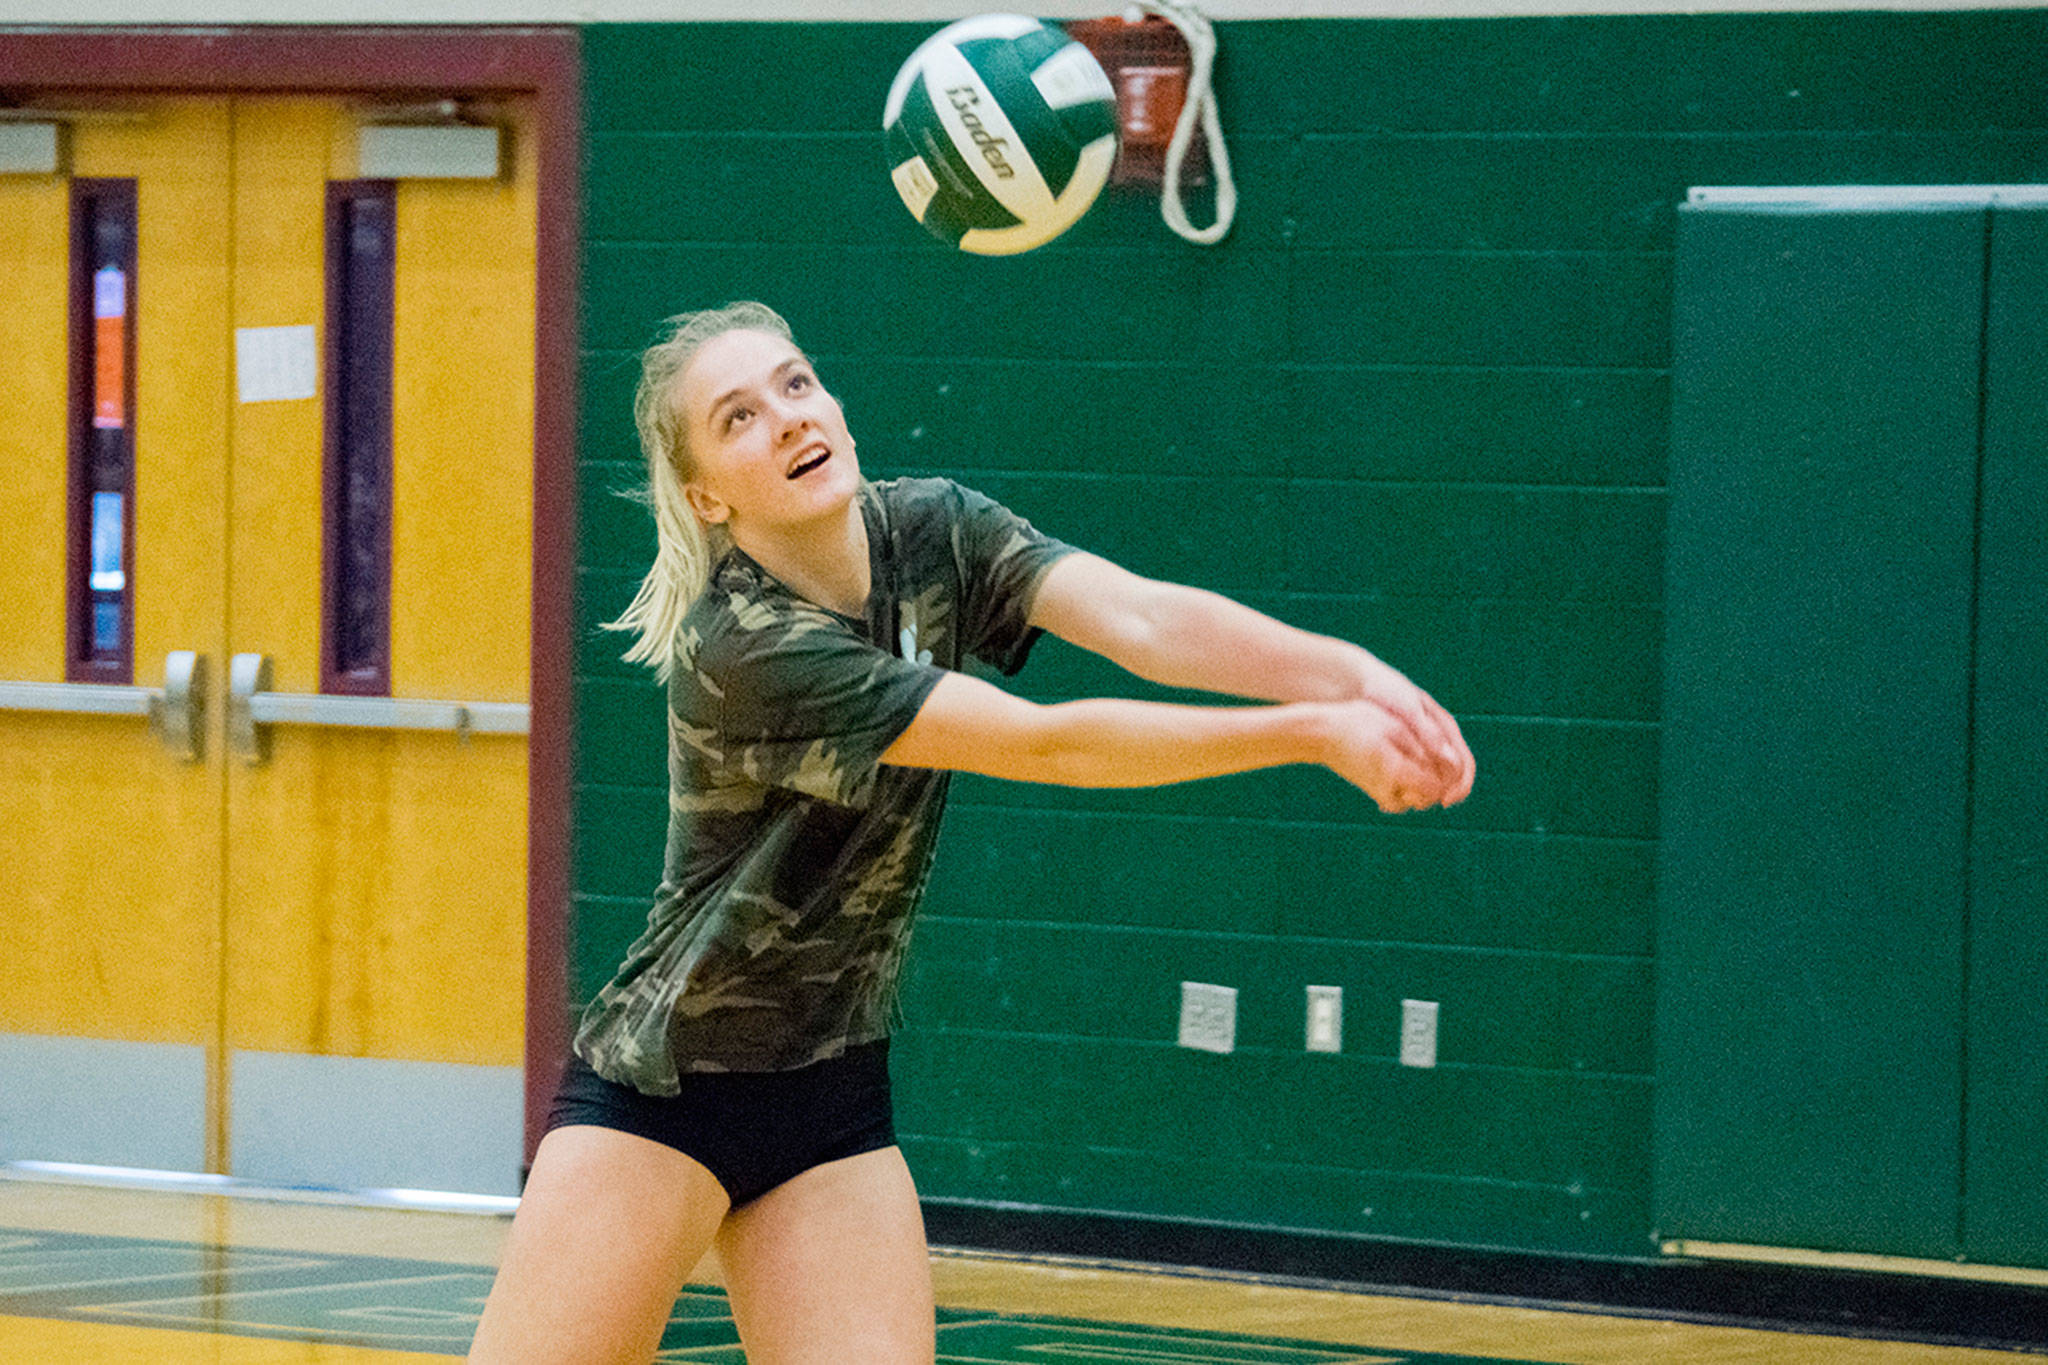 Jackson senior Paige Wilson, a second-team All-Area selection, averaged 3.7 kills per set on a .255 hitting percentage and added 2.8 digs and 1.0 aces per frame this season. (Katie Webber / The Herald)